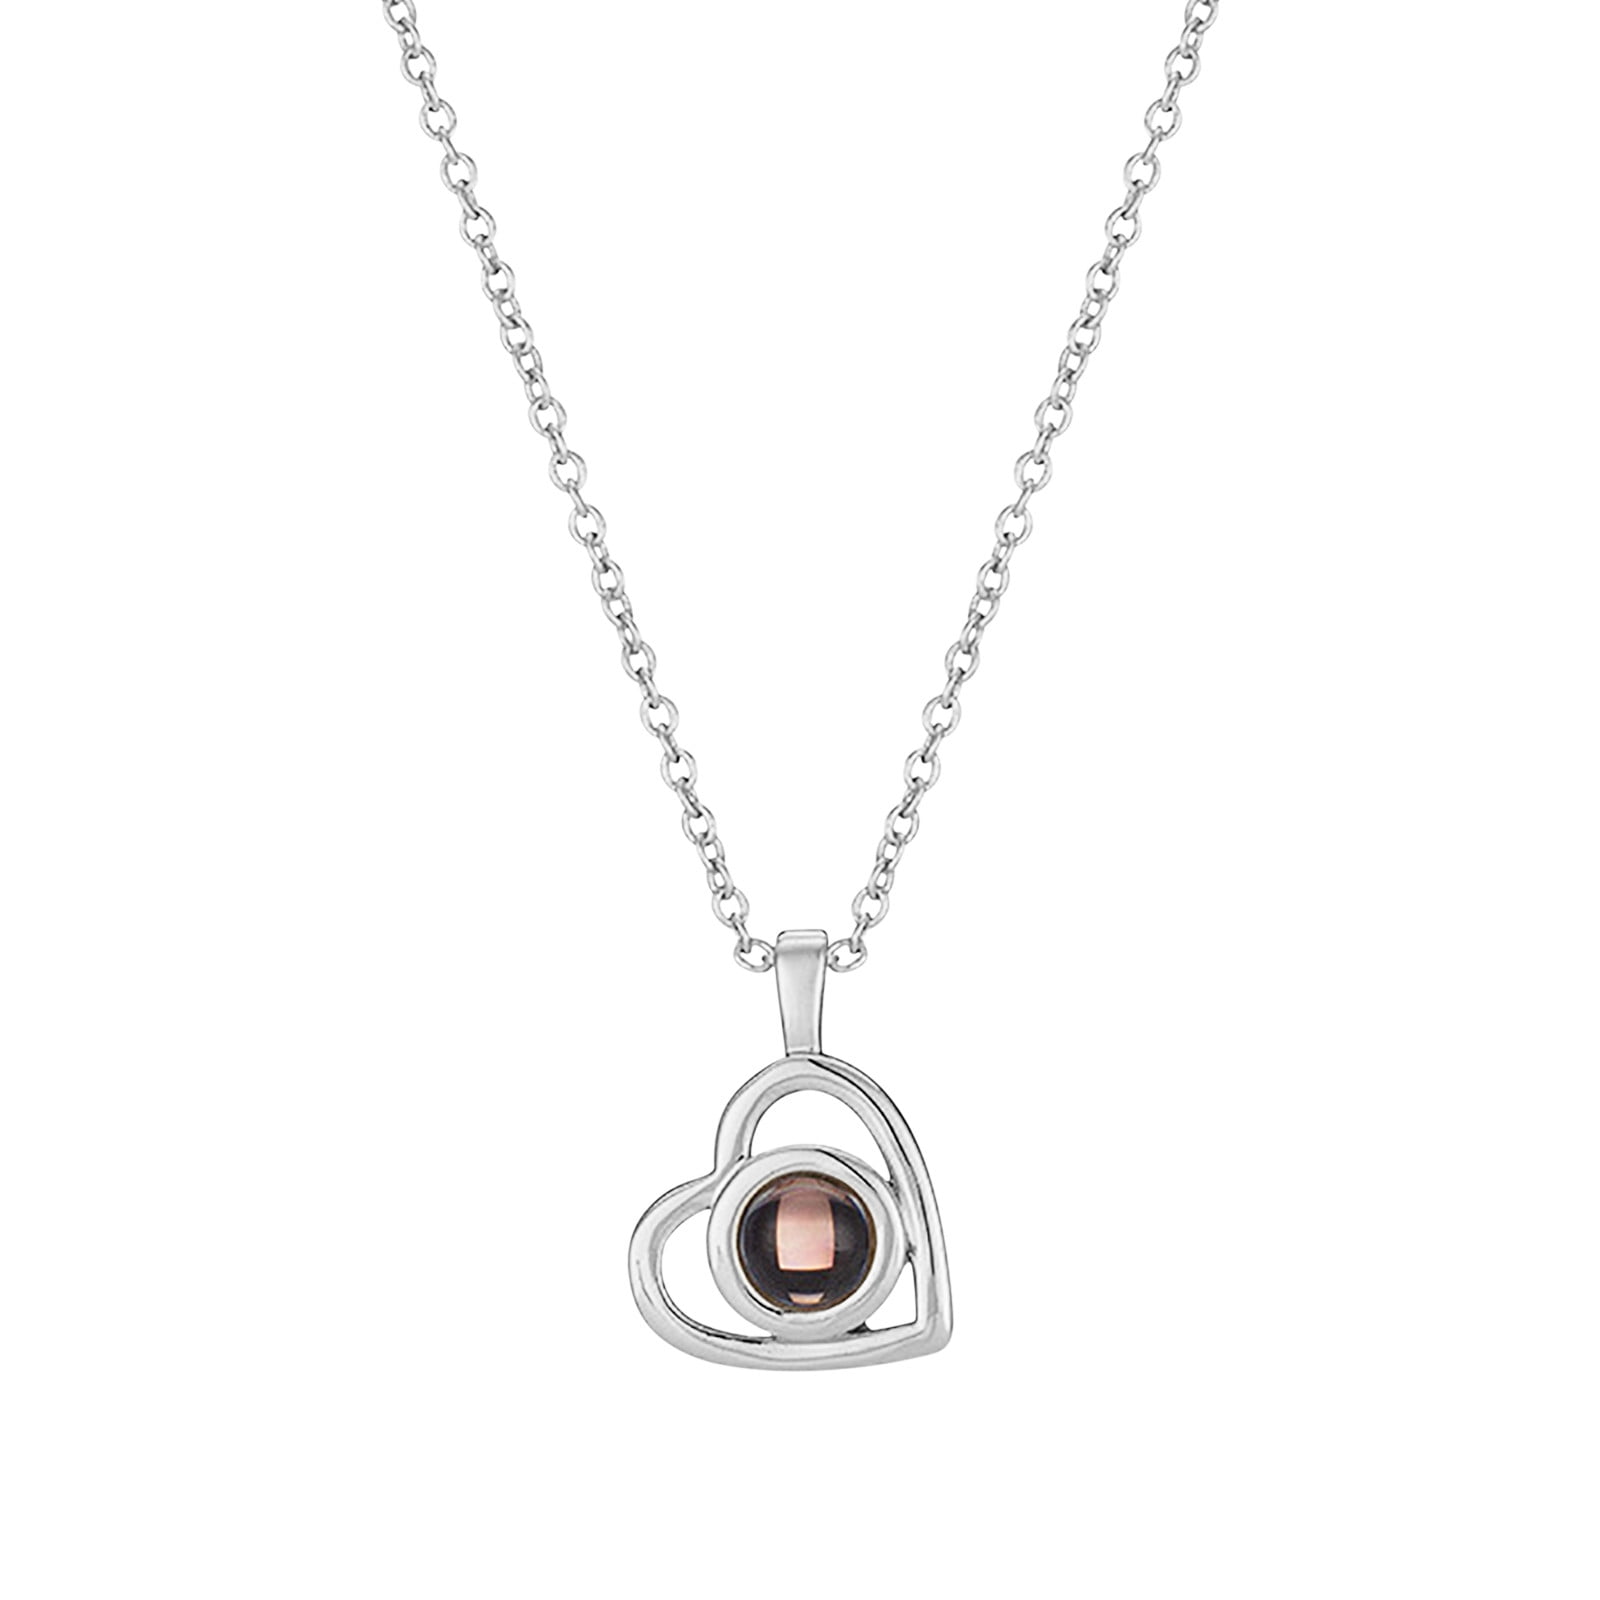 Details about   Genuine 925 Sterling Silver Heart Locket Pendant W/ Real Diamond & Snake Chain